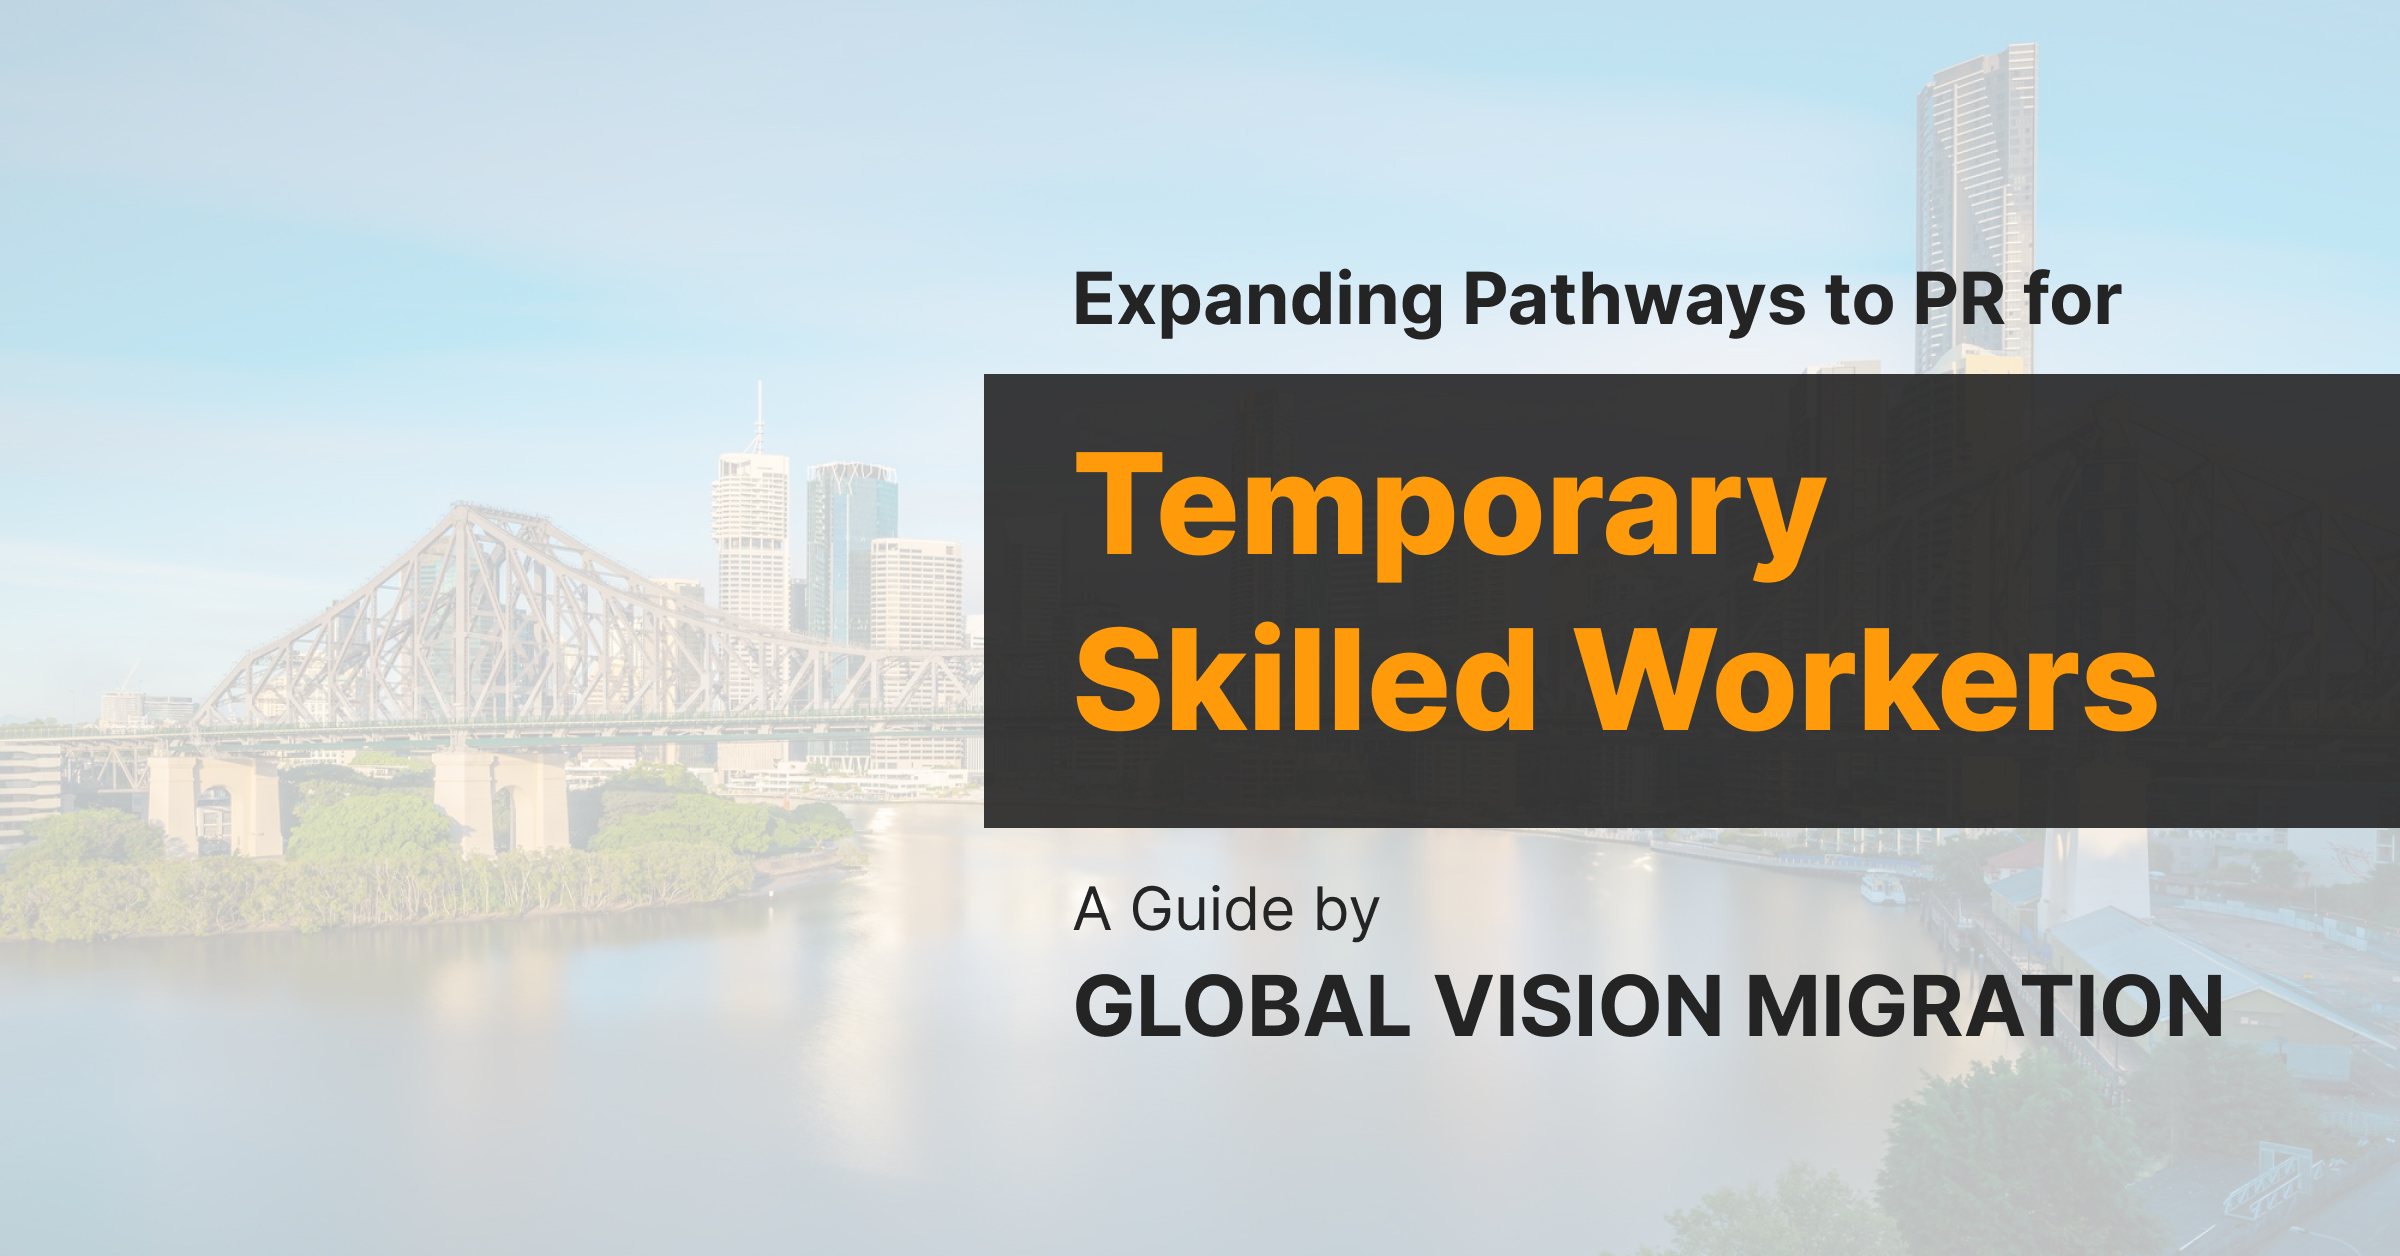 Expanding Pathways to PR for Temporary Skilled Workers: A Guide by Global Vision Migration